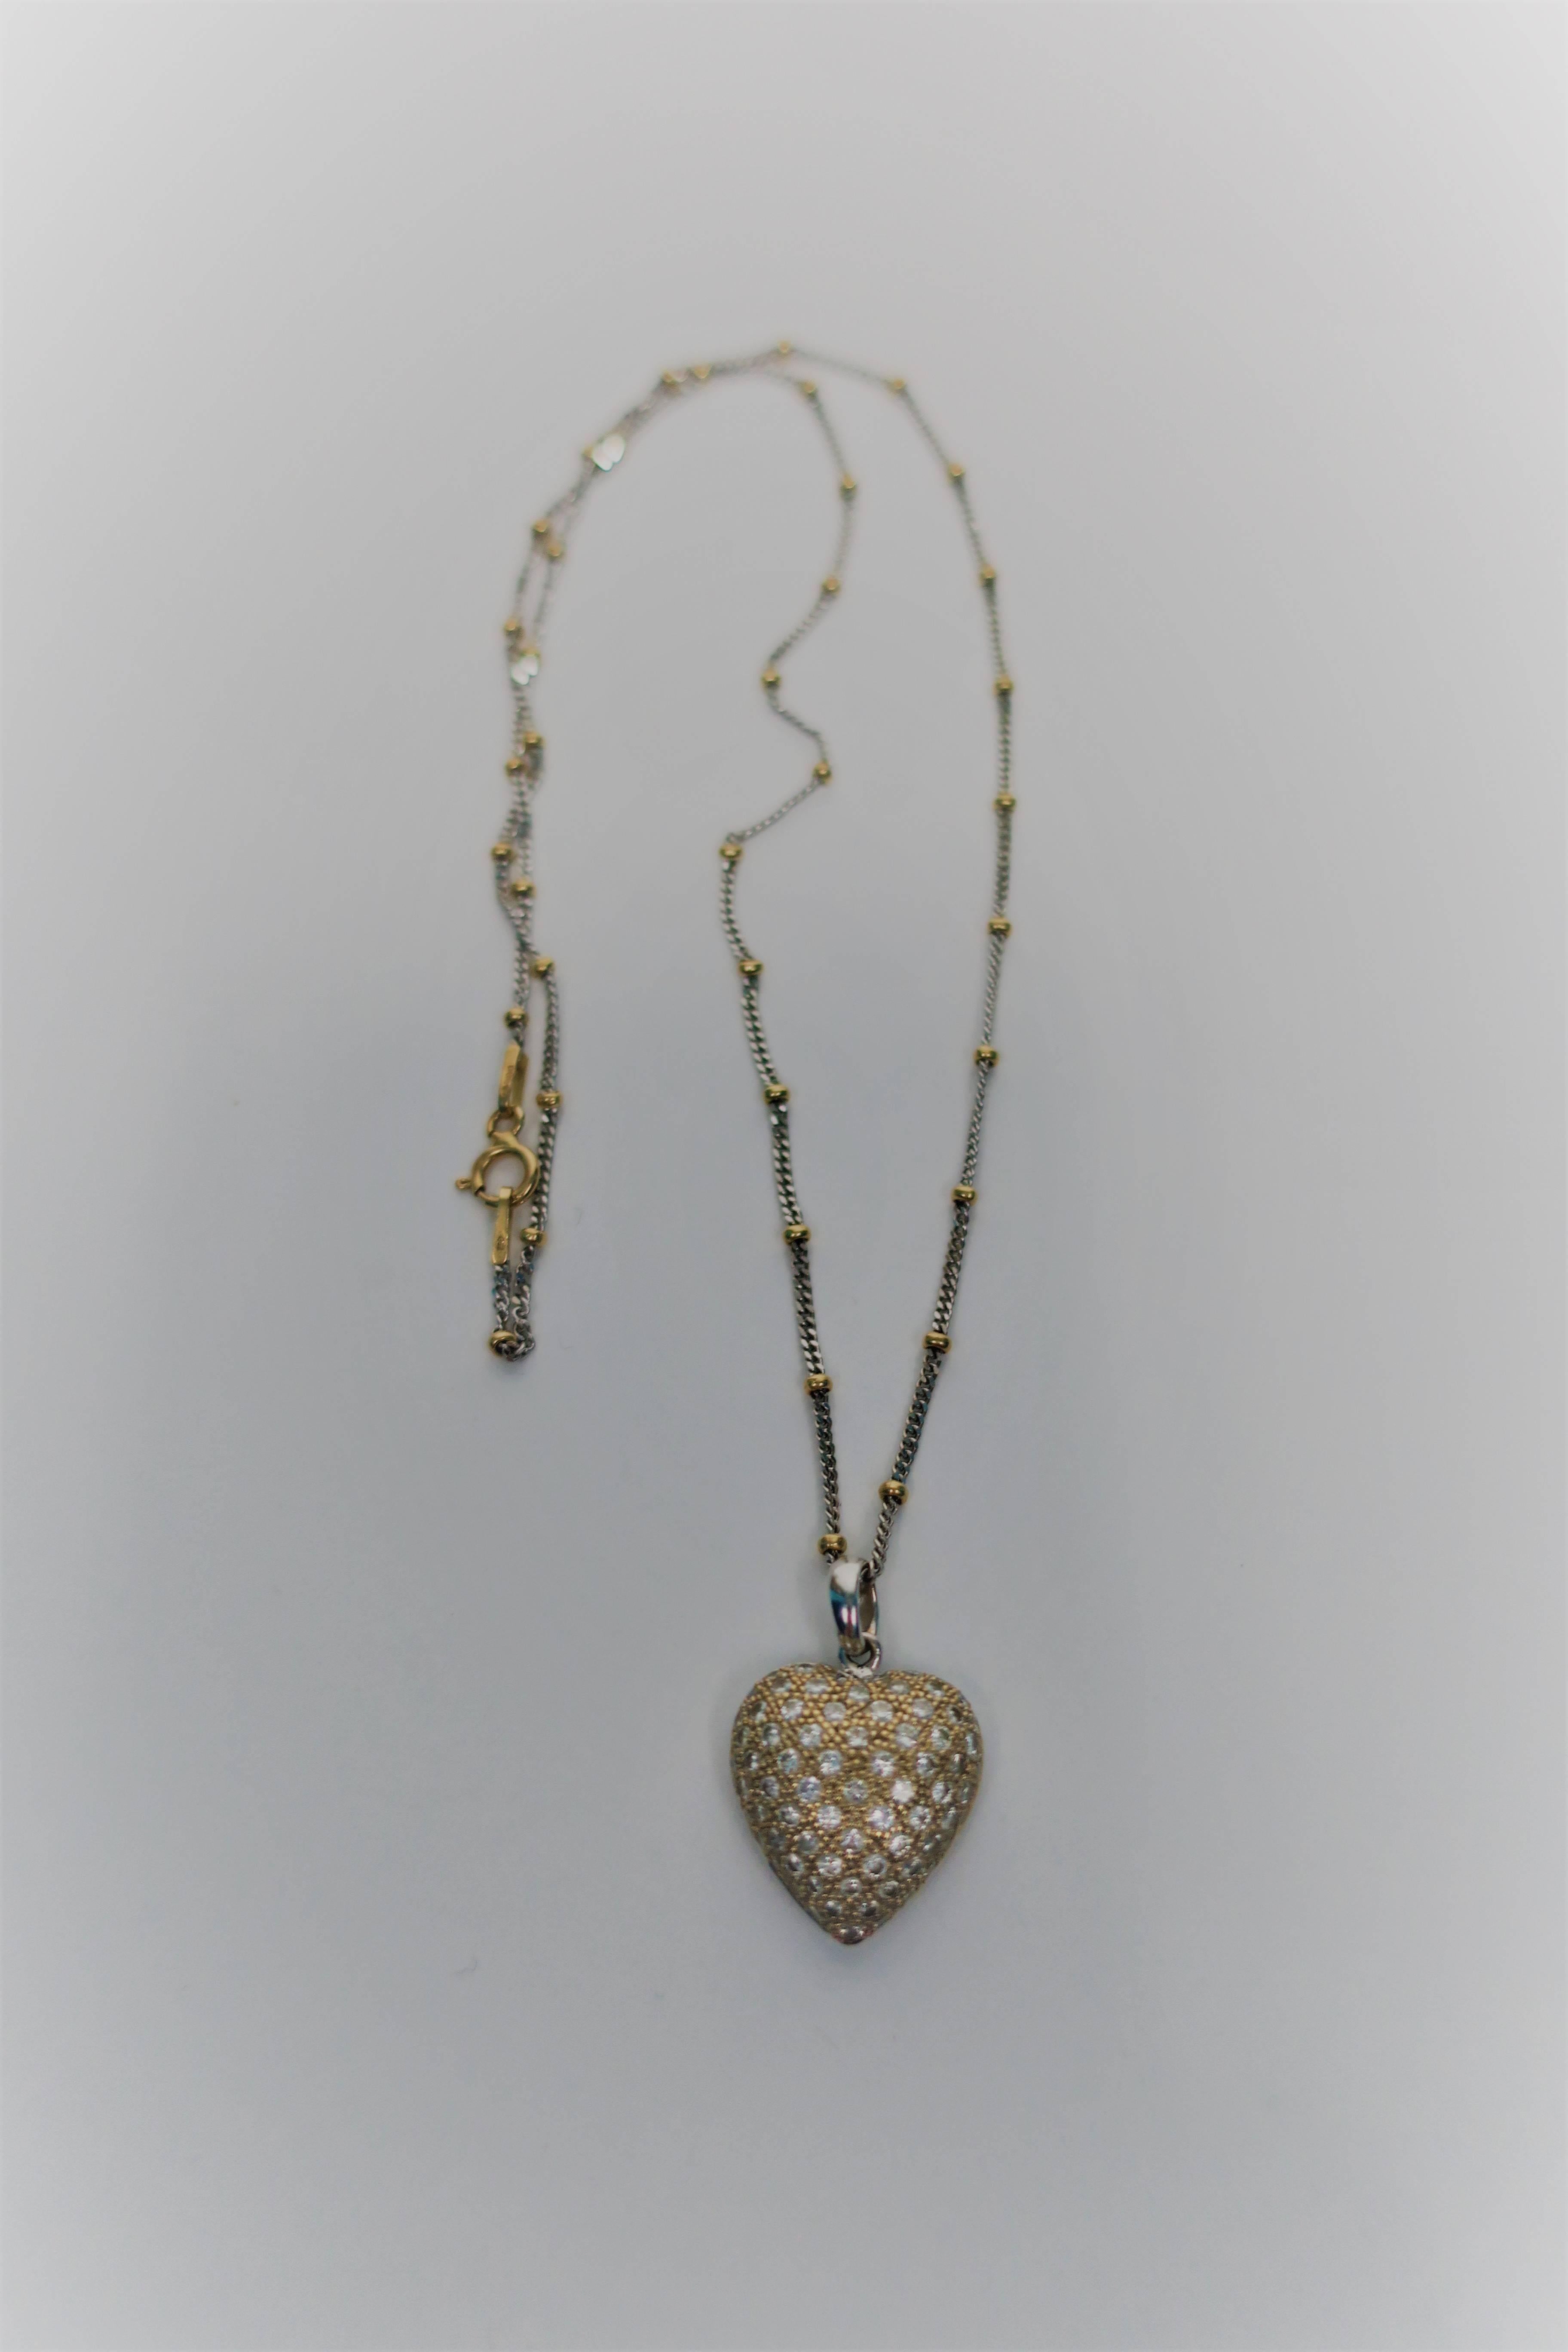 A beautiful and sparkly Pave' diamond and 18-Karat yellow and white gold pendant heart with necklace, in the style of Cartier. Necklace is a beautiful combination of white and yellow 18-karat gold and measures: 17